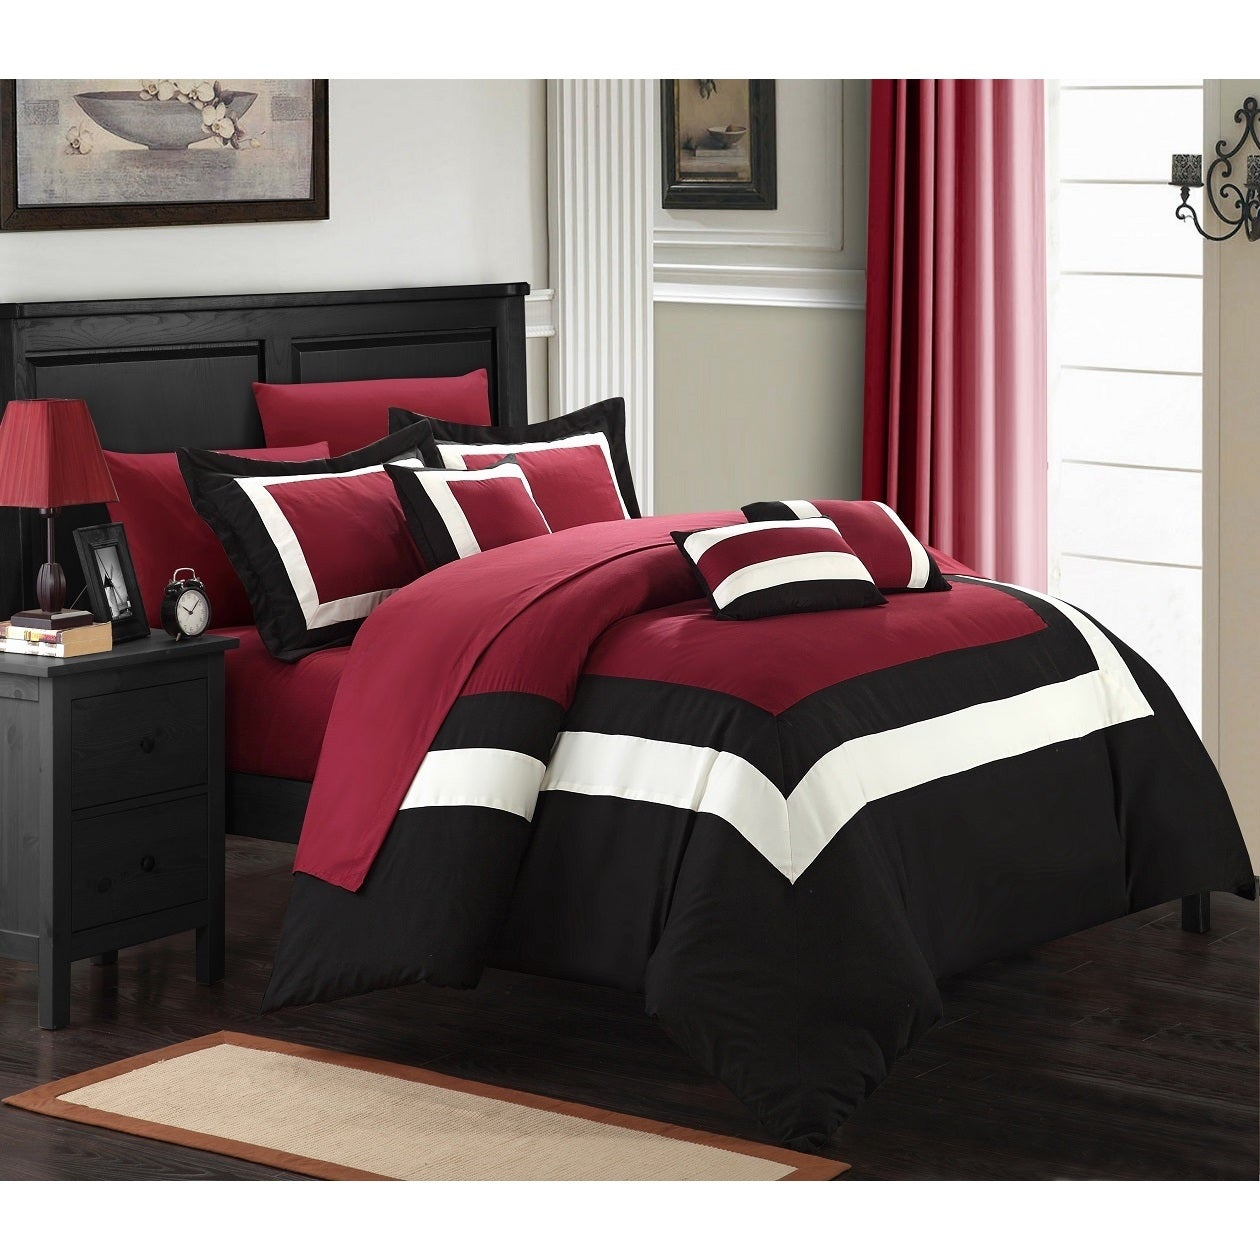 Copper Grove Minesing Red White Black 10 Piece Bed In A Bag With Sheet Set throughout size 1260 X 1260